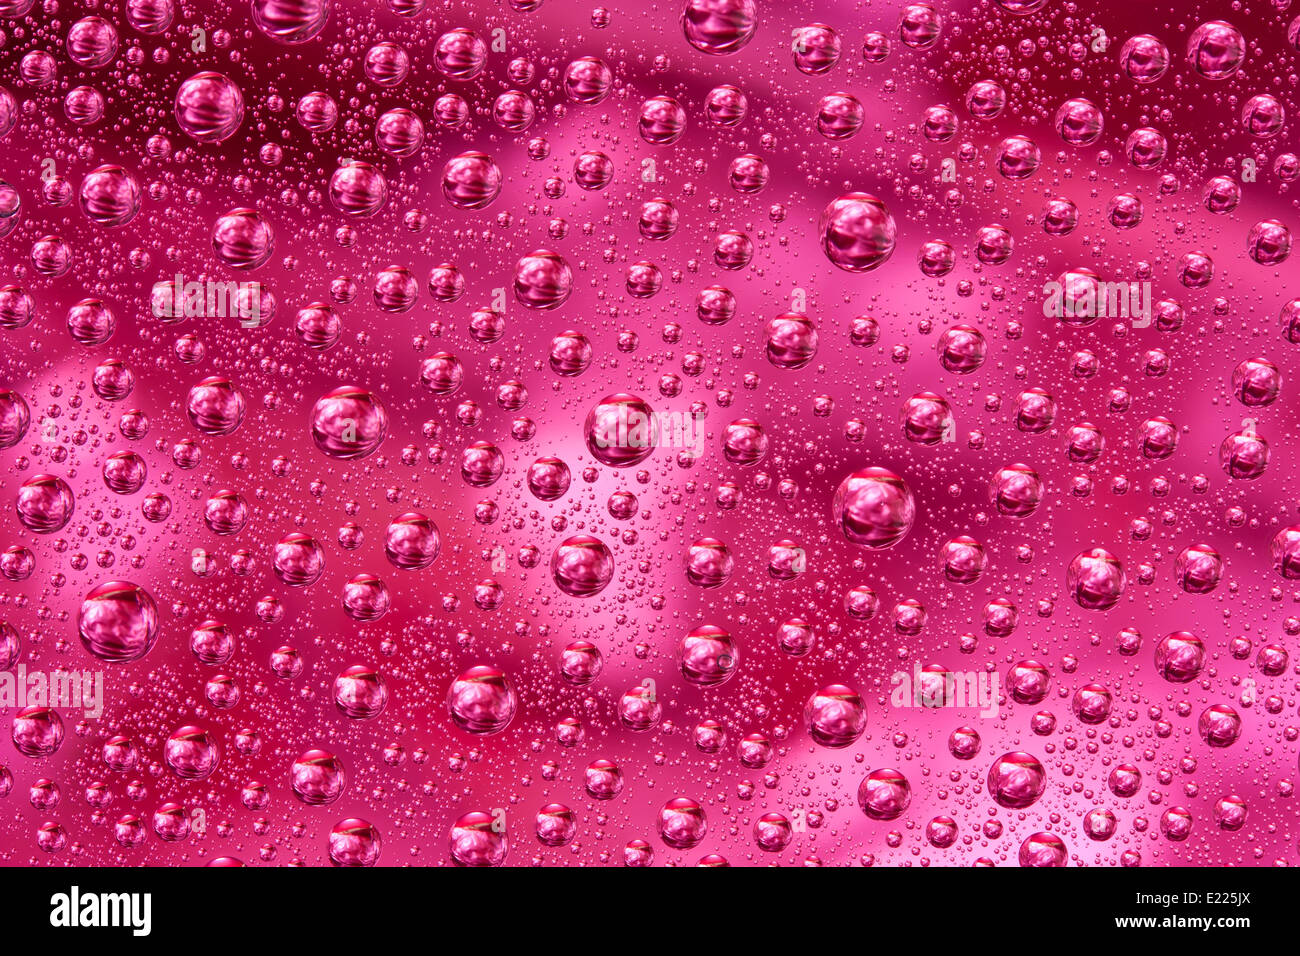 Red water drops texture Stock Photo